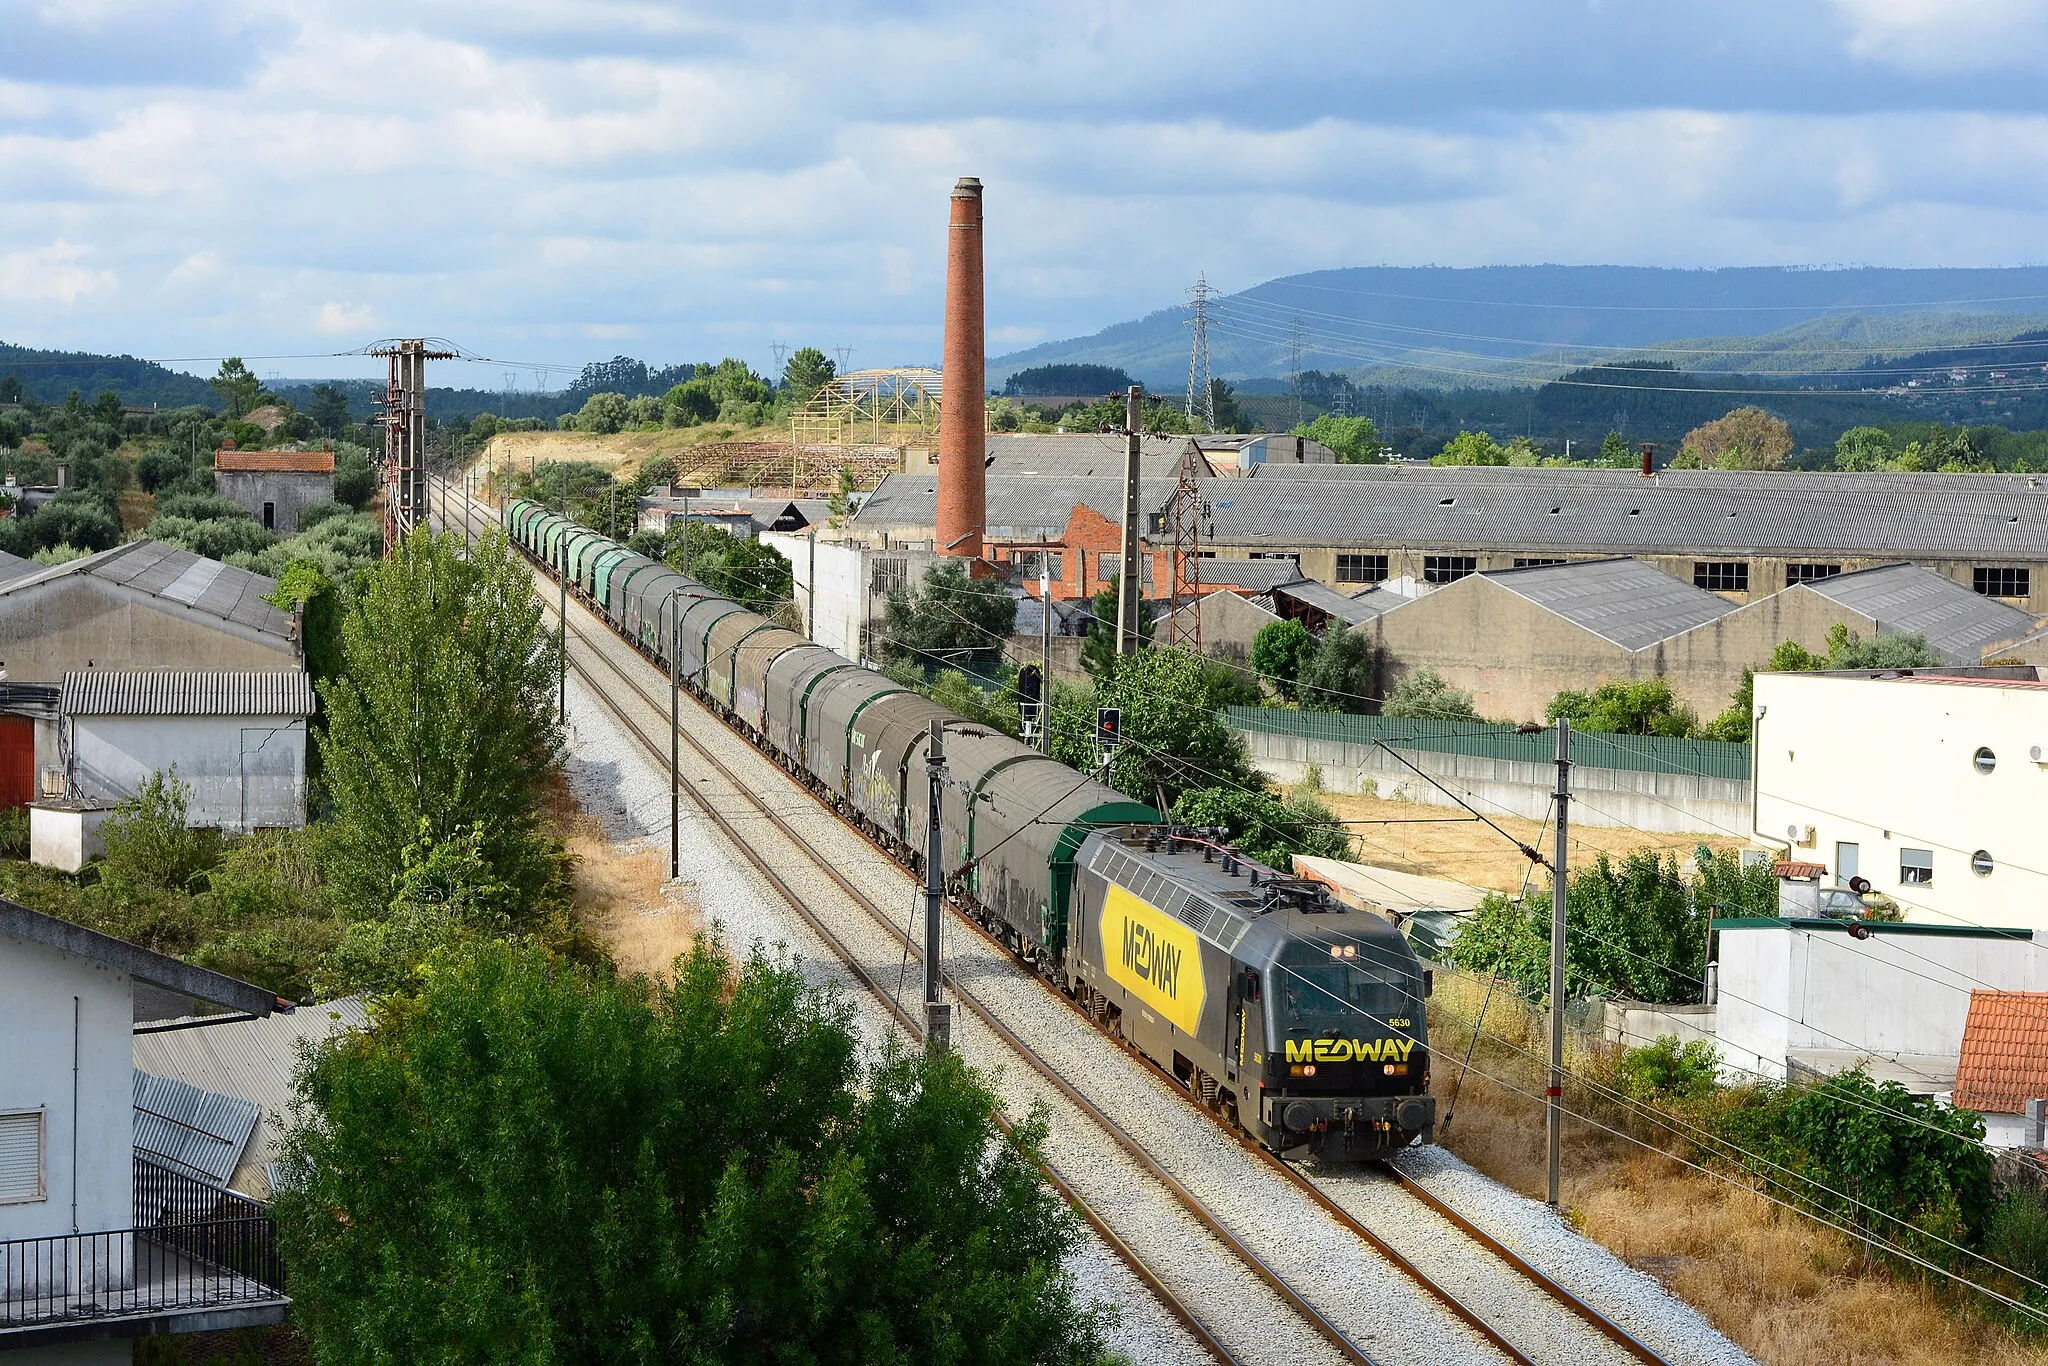 Photo showing: Siemens Eurosprinter Medway 5630 with a mixed freight train from Vilar Formoso to Penalva.

www.photrain.net/photos/photo/9094